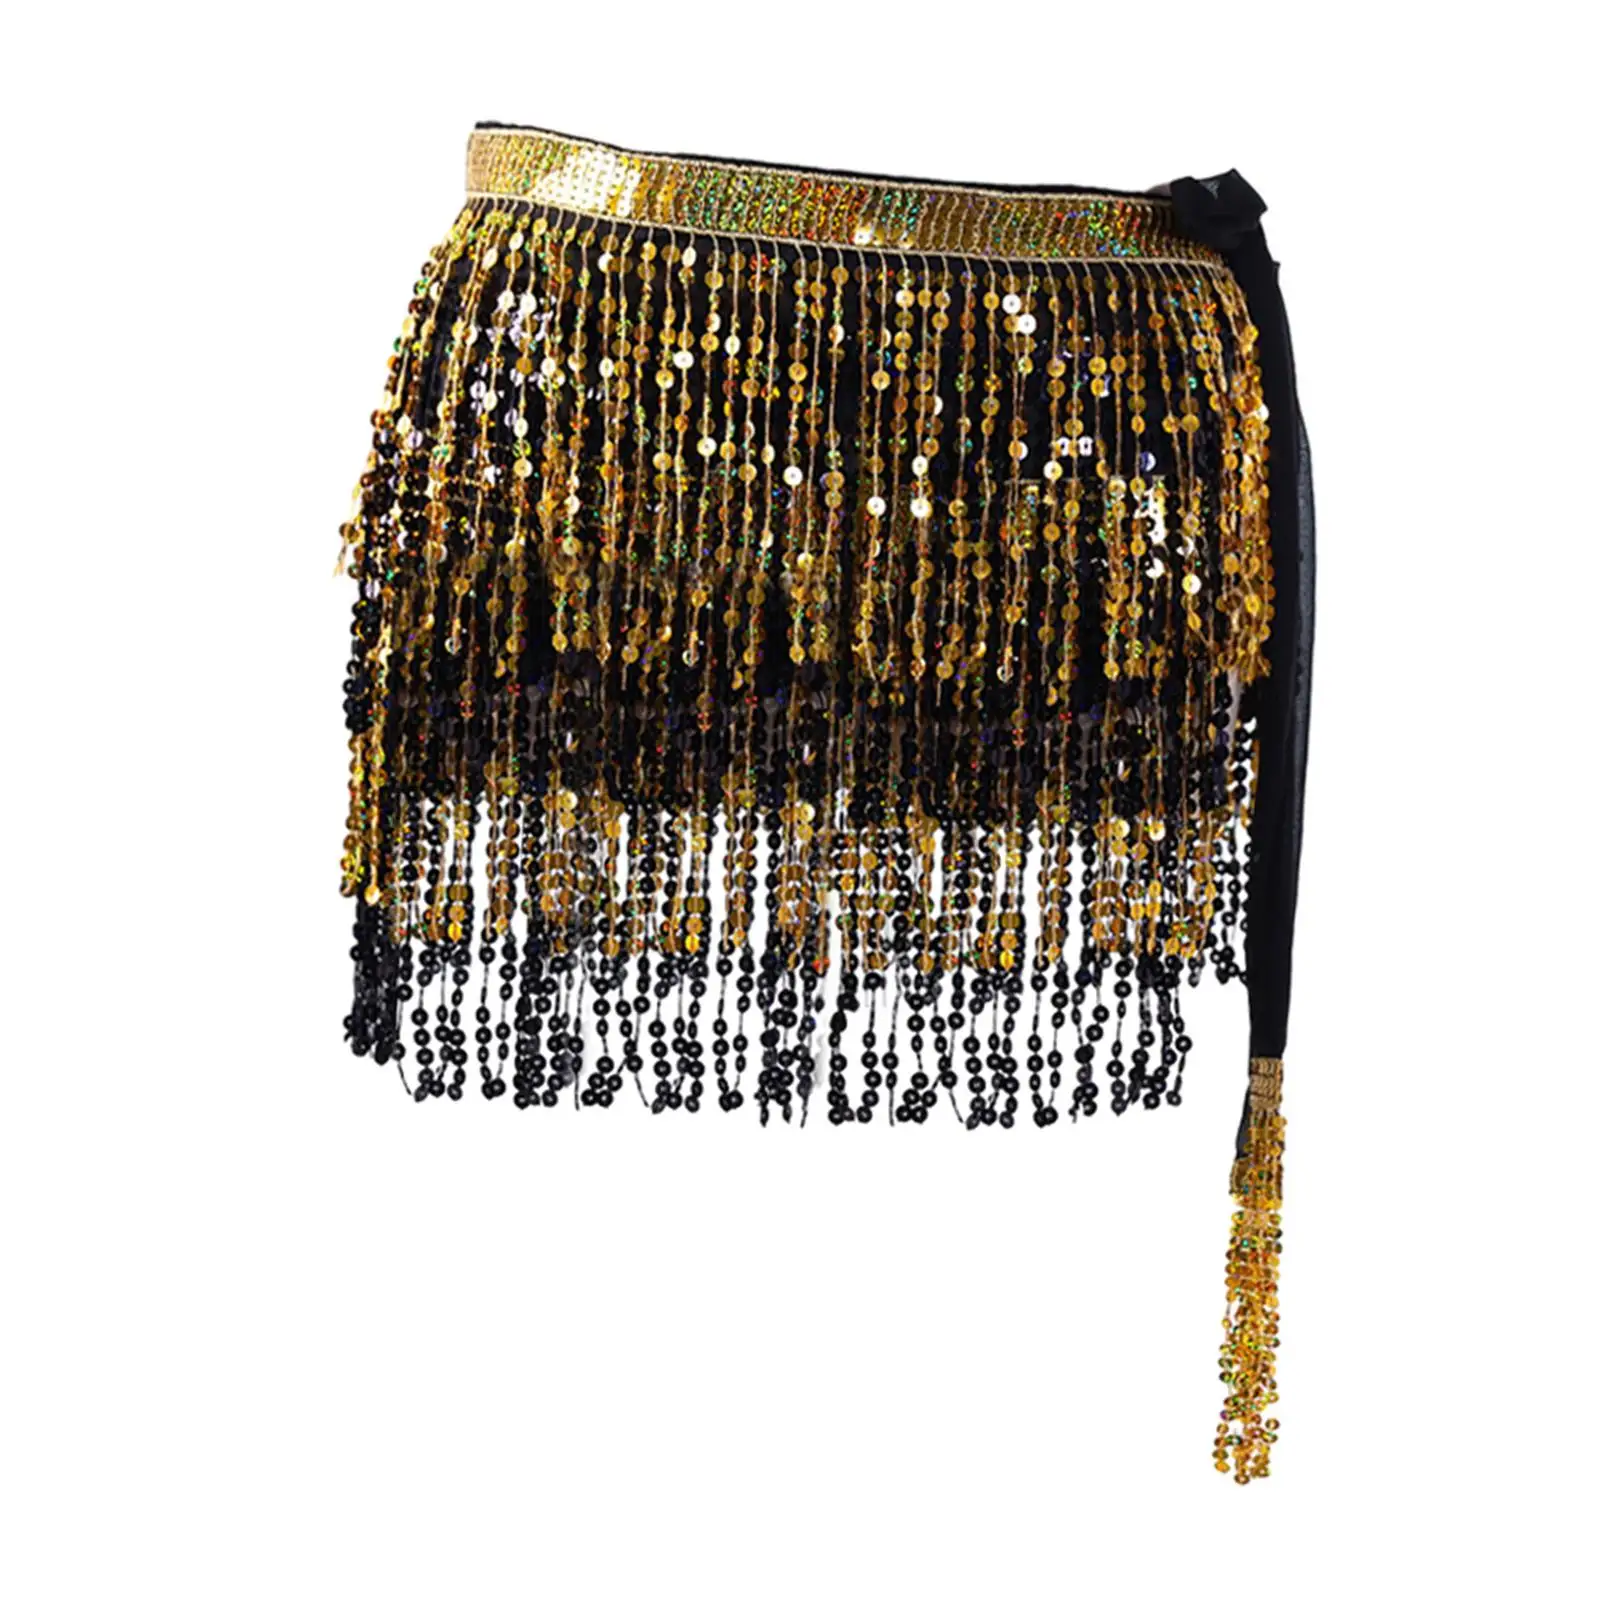 Women Belly Dance Hip Scarf Wrap for Dancing Practicing Festival Holiday